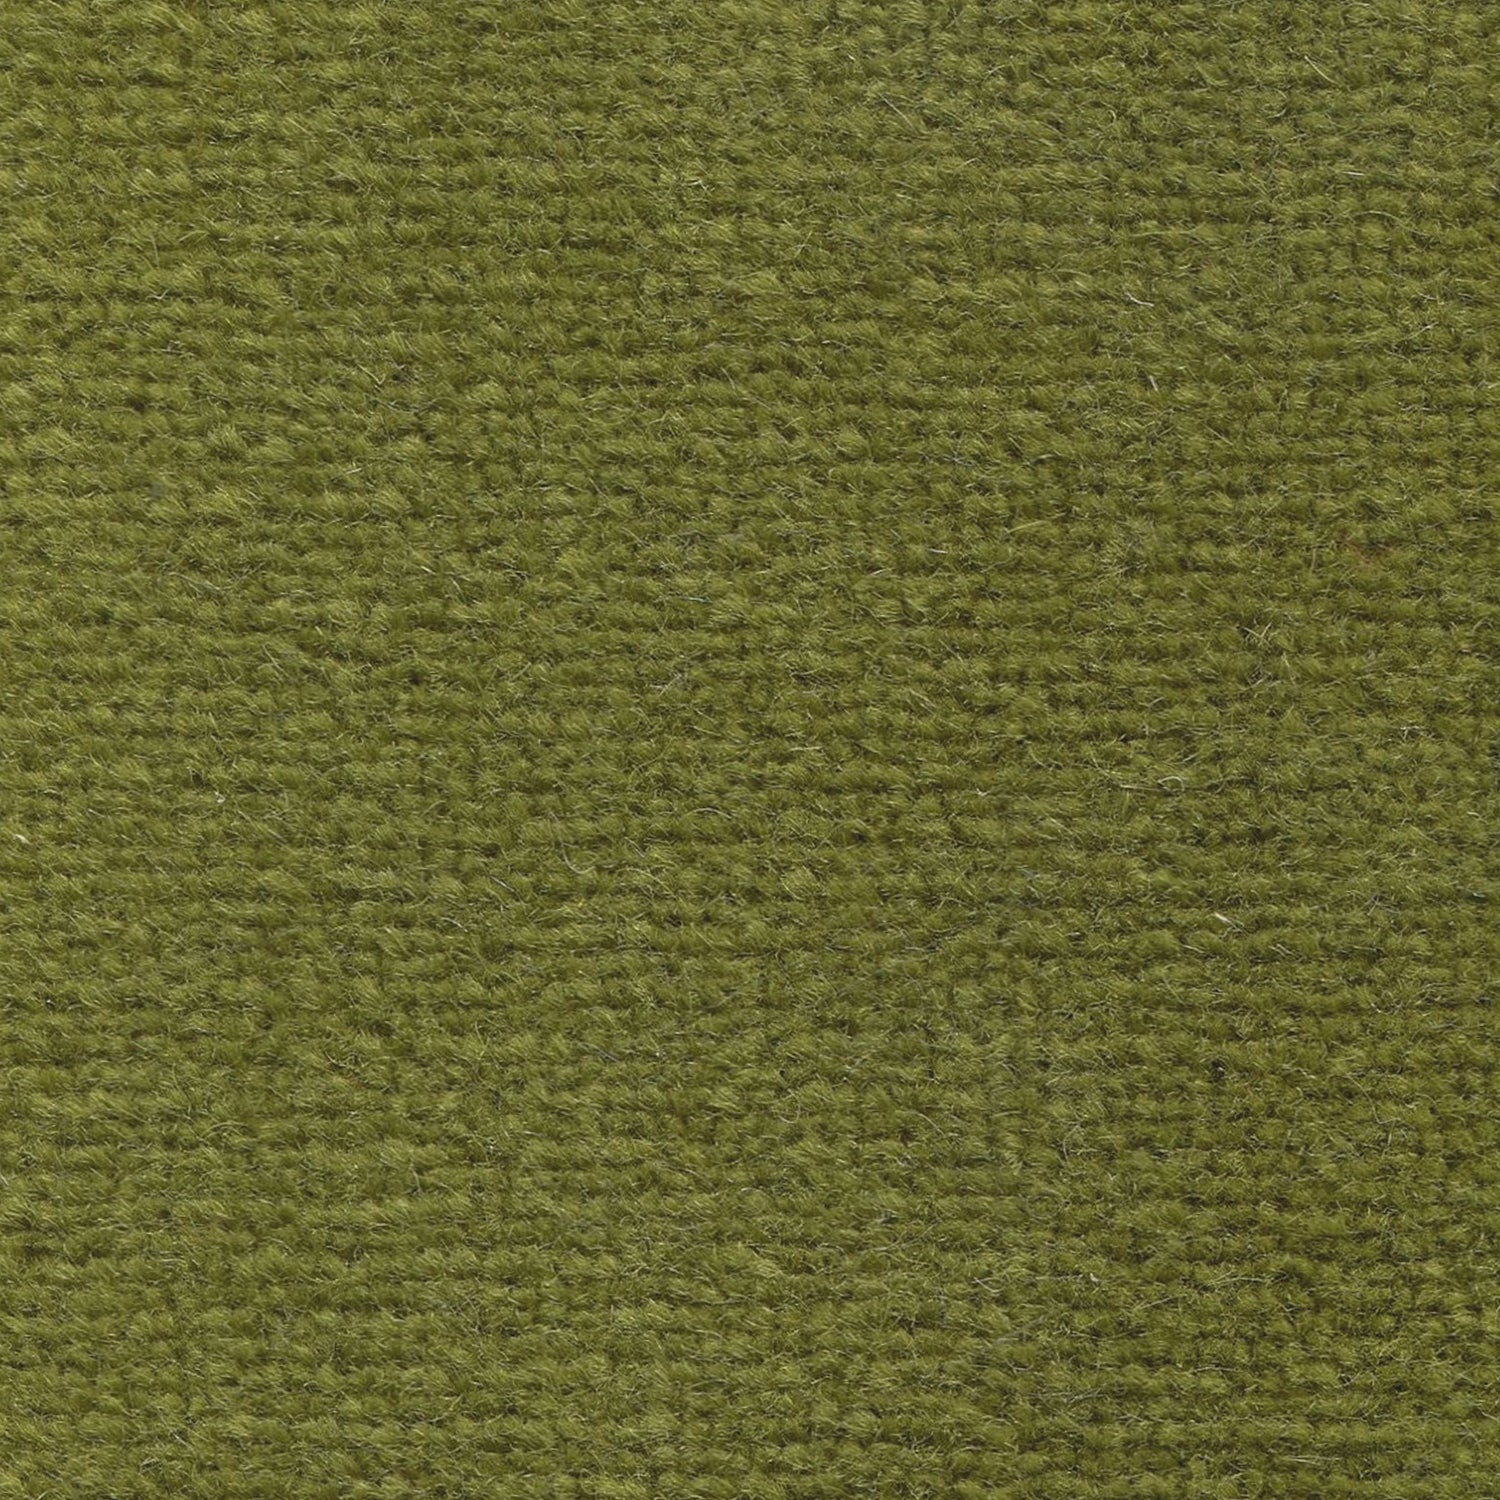 Wool broadloom carpet swatch in a high-pile weave in a solid olive colorway.